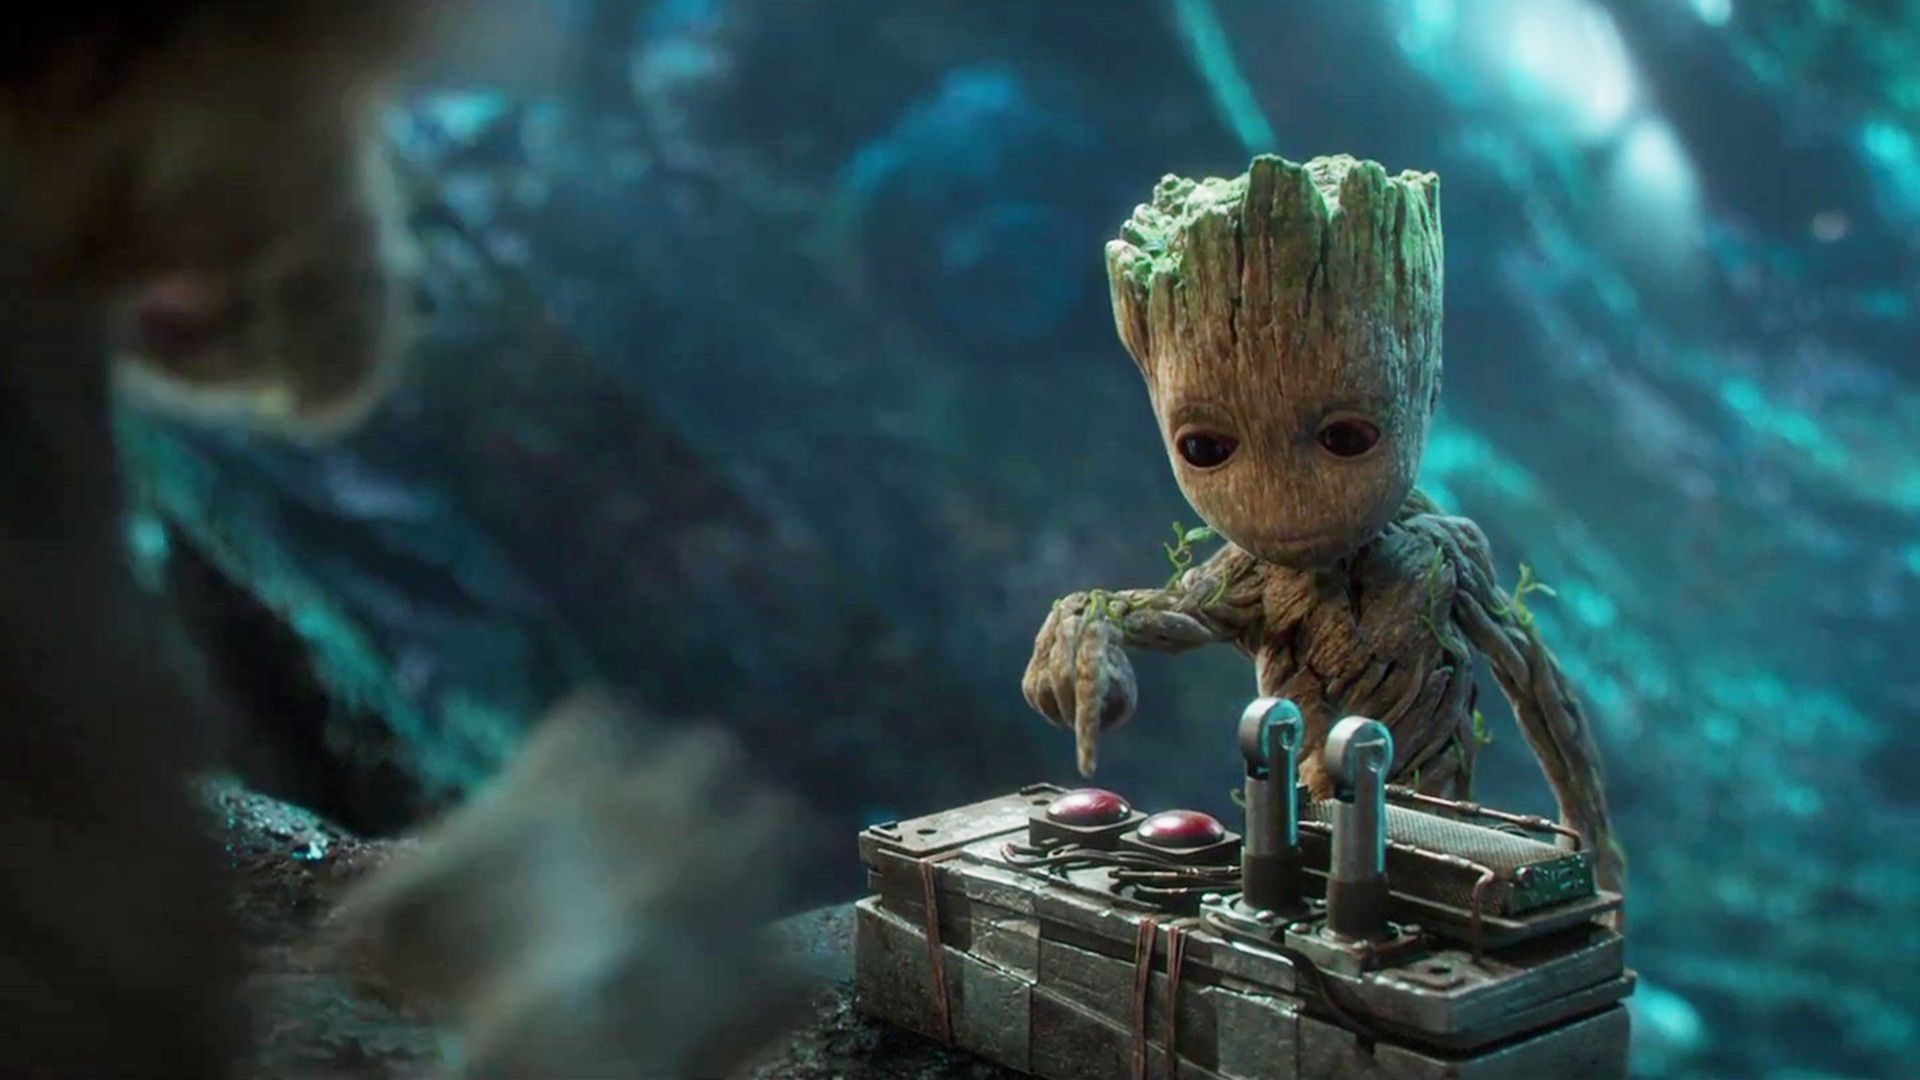 Free download Guardians Of The Galaxy Vol 2 Baby Groot Wallpaper 11625 [1920x1080] for your Desktop, Mobile & Tablet. Explore Guardians Of The Galaxy Vol. 2 Wallpaper